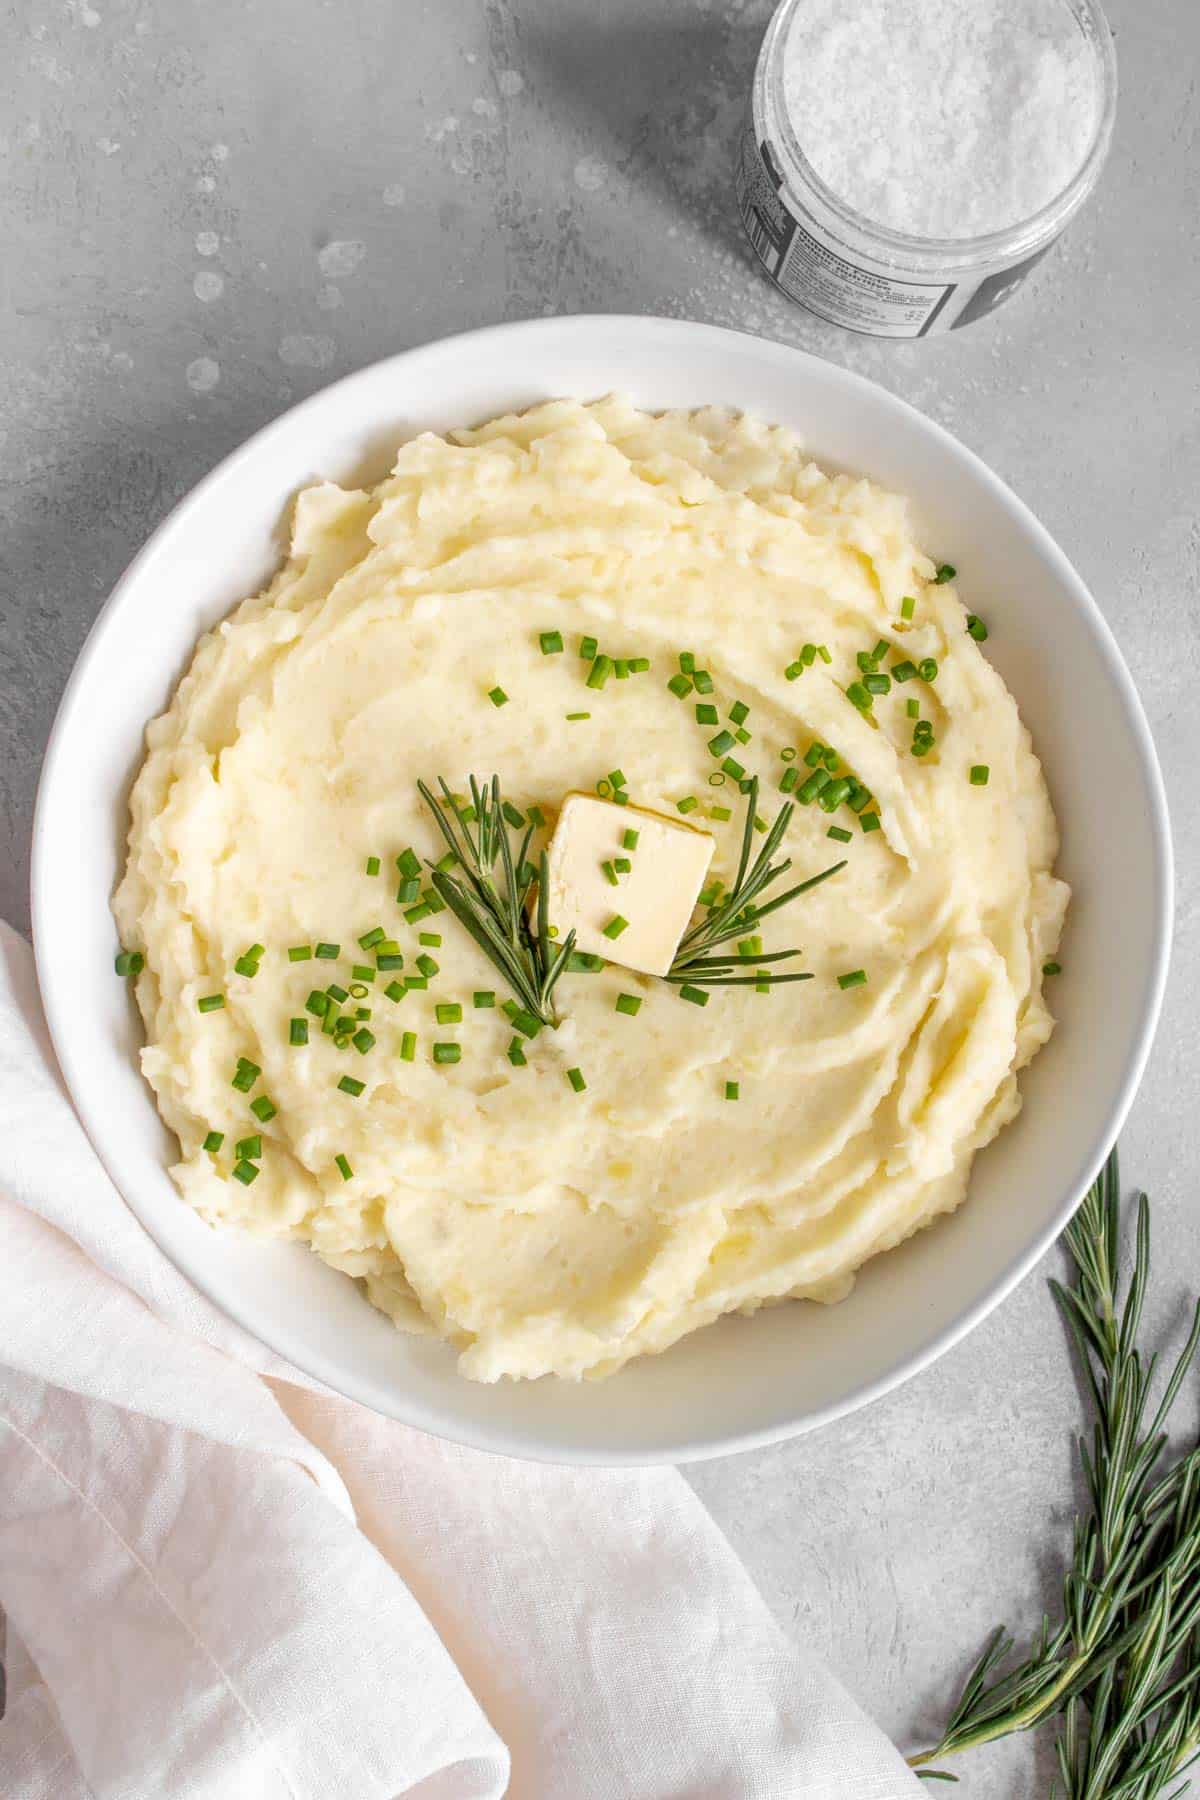 A bowl of rosemary mashed potatoes with butter, chives, and rosemary.